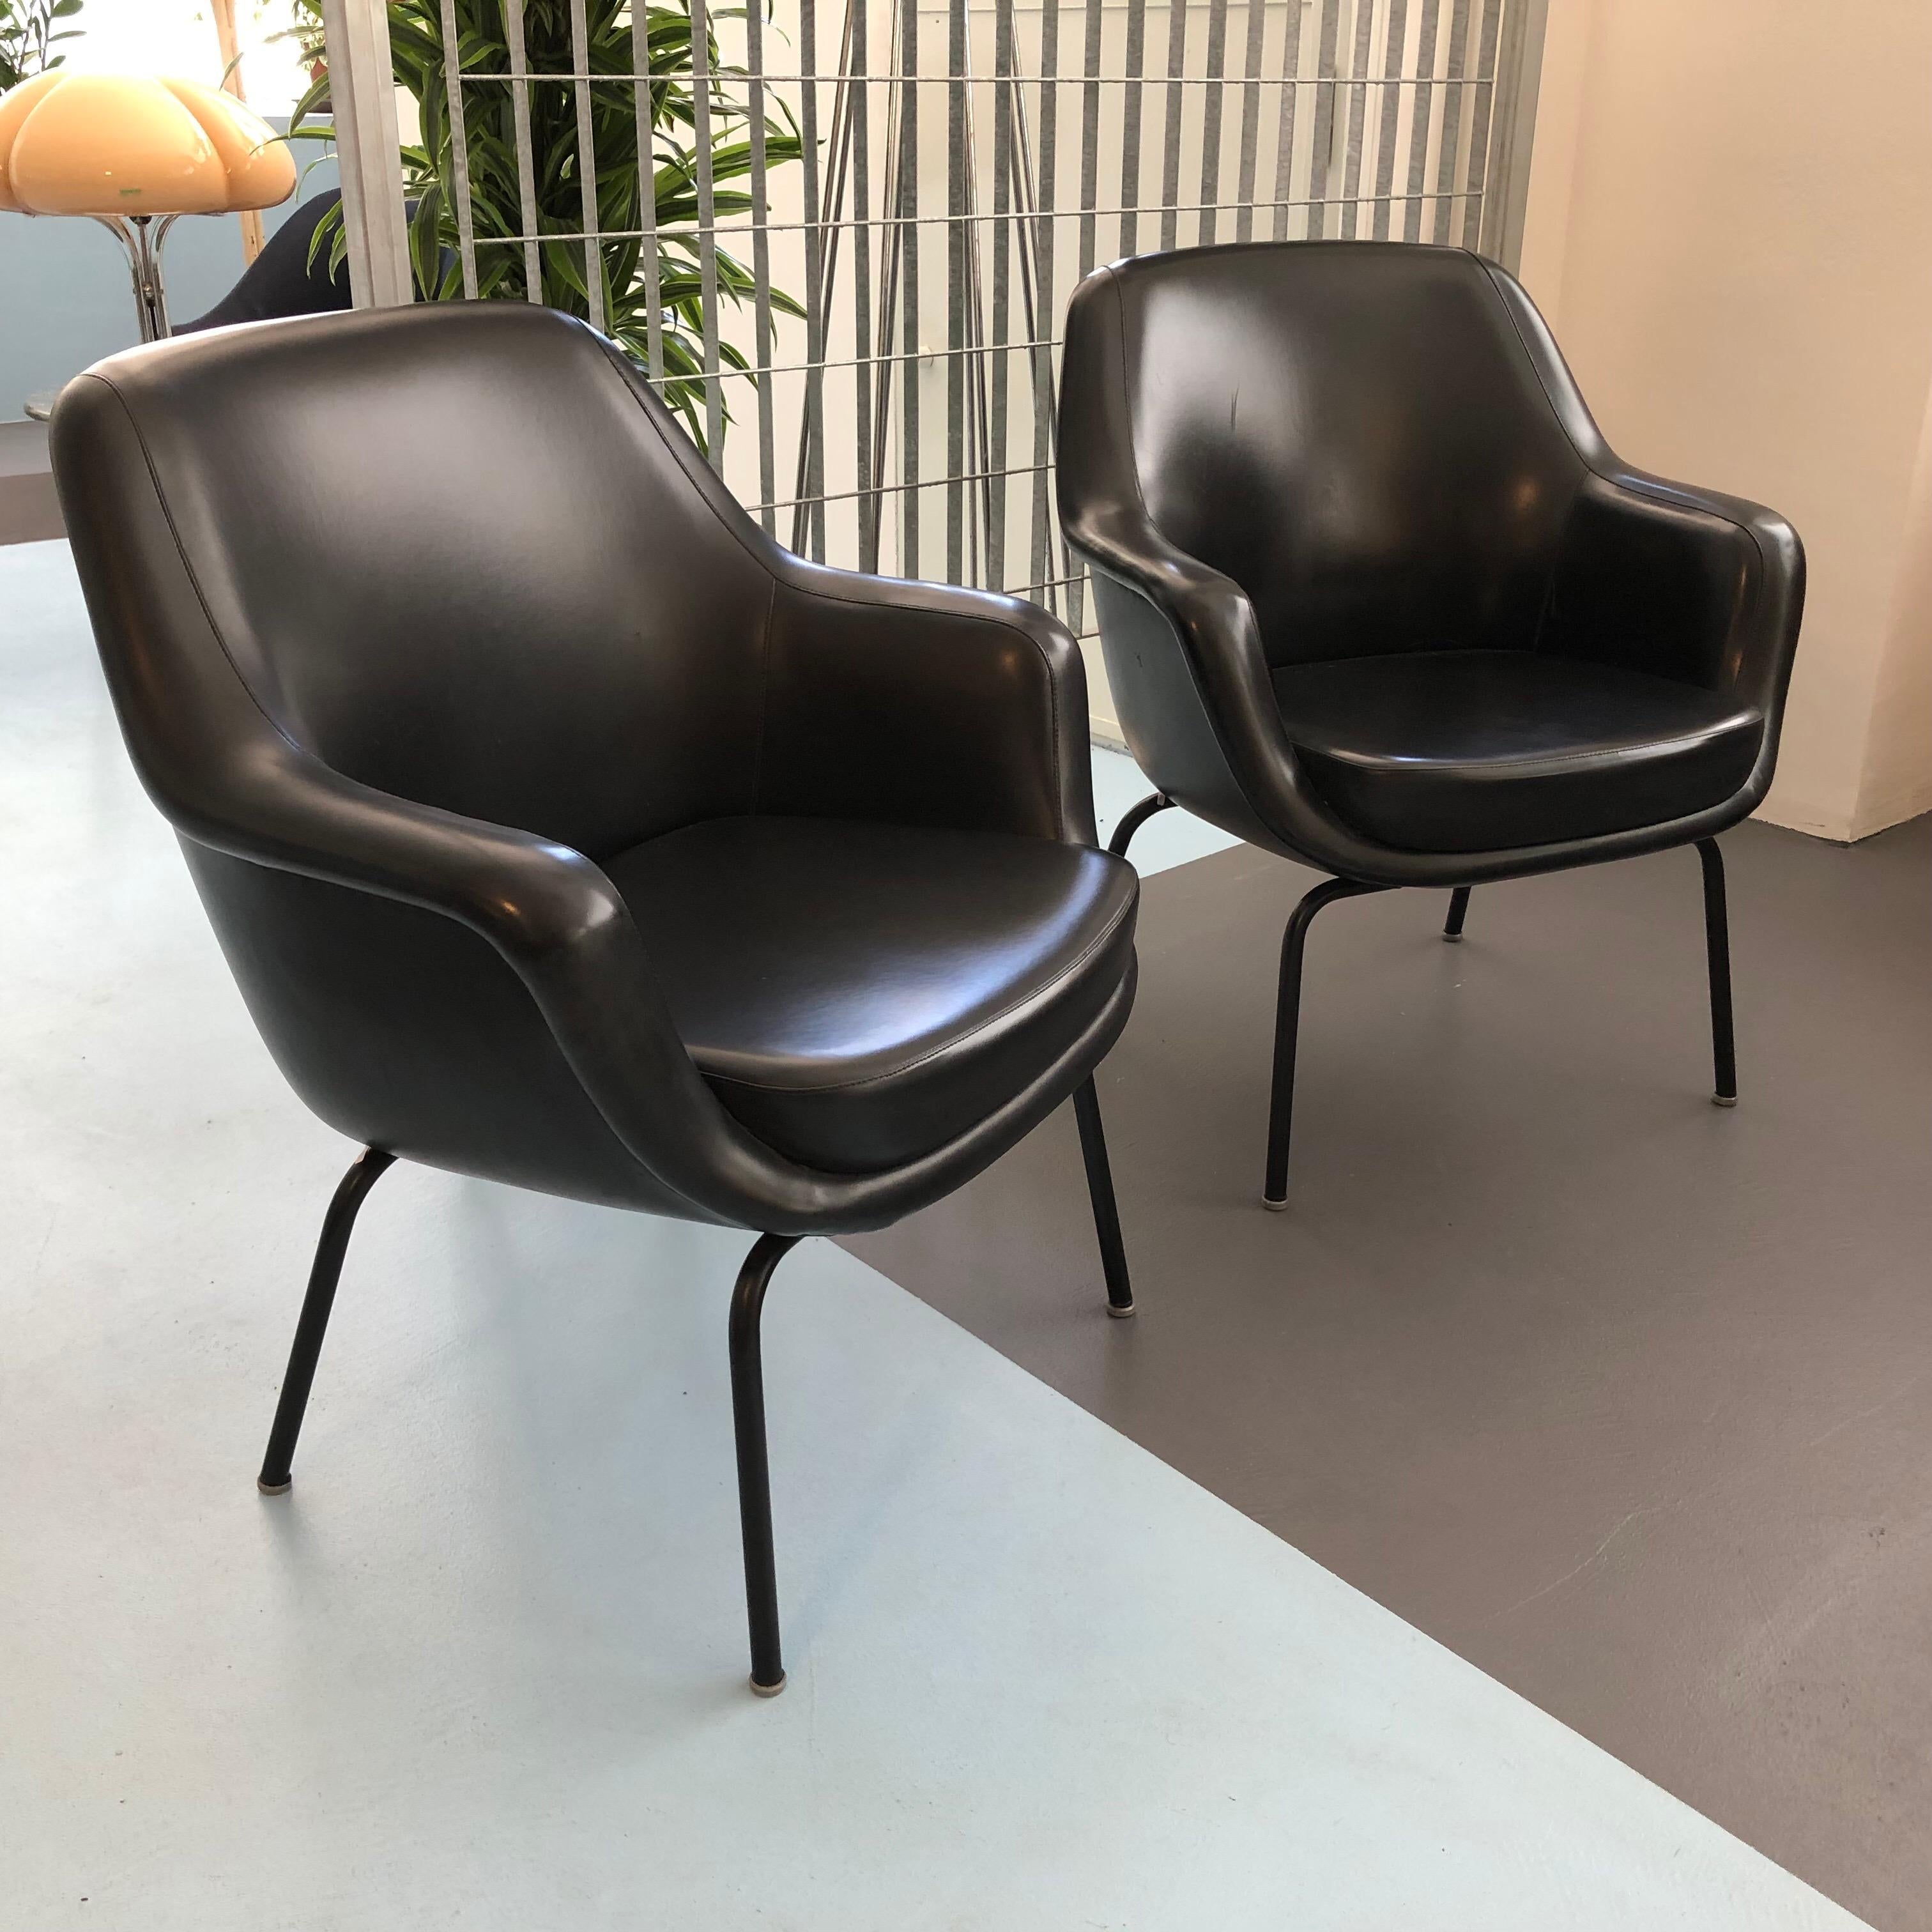 Pair of Olli Mannermaa Armchairs by Cassina, Italy, 1960s For Sale 4